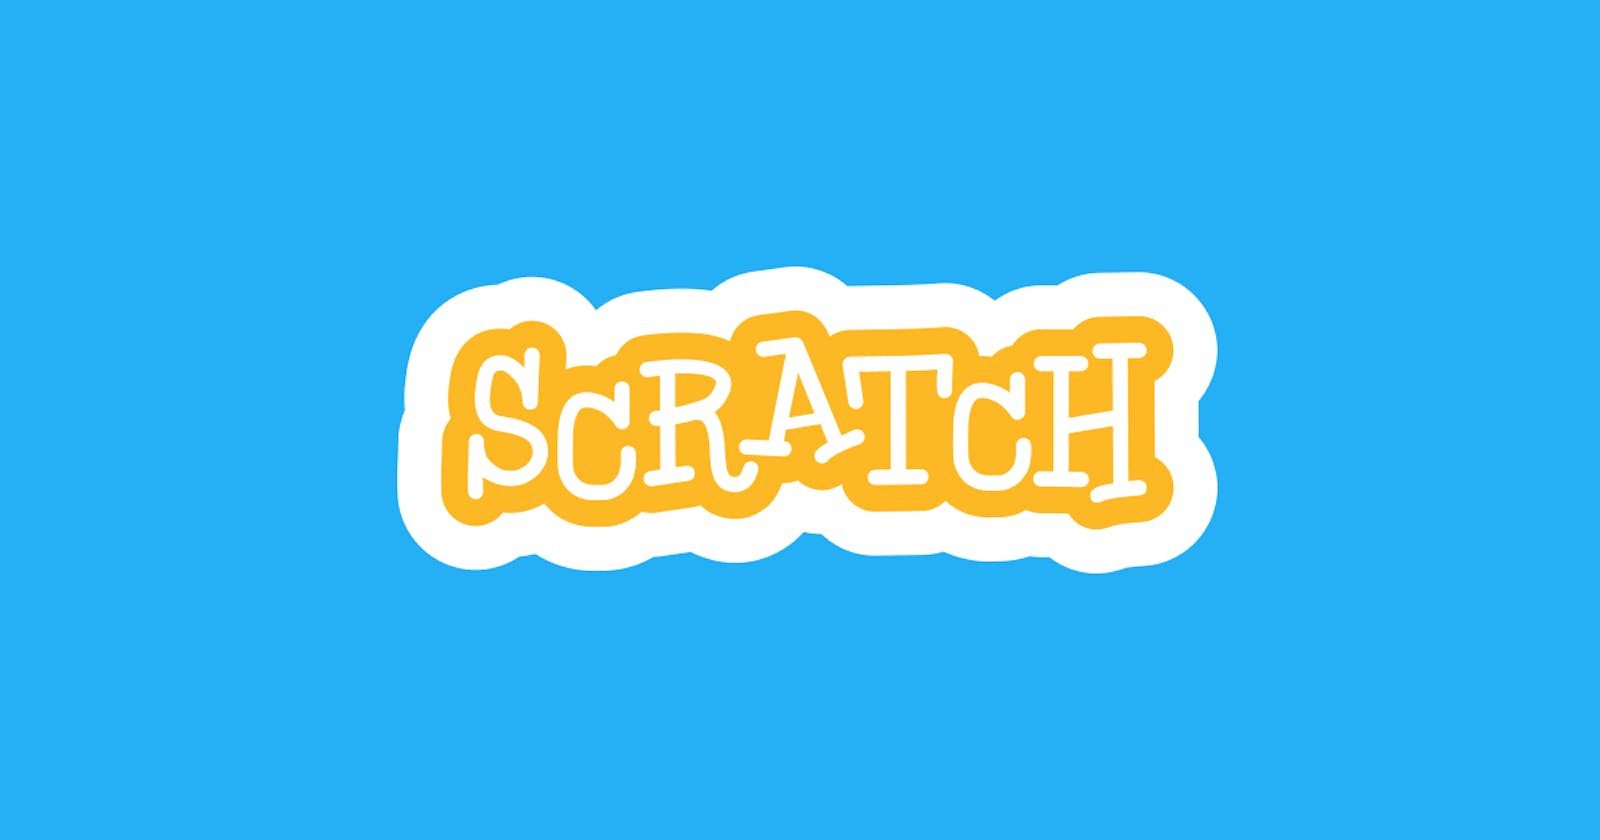 Creating a game in scratch for CS50